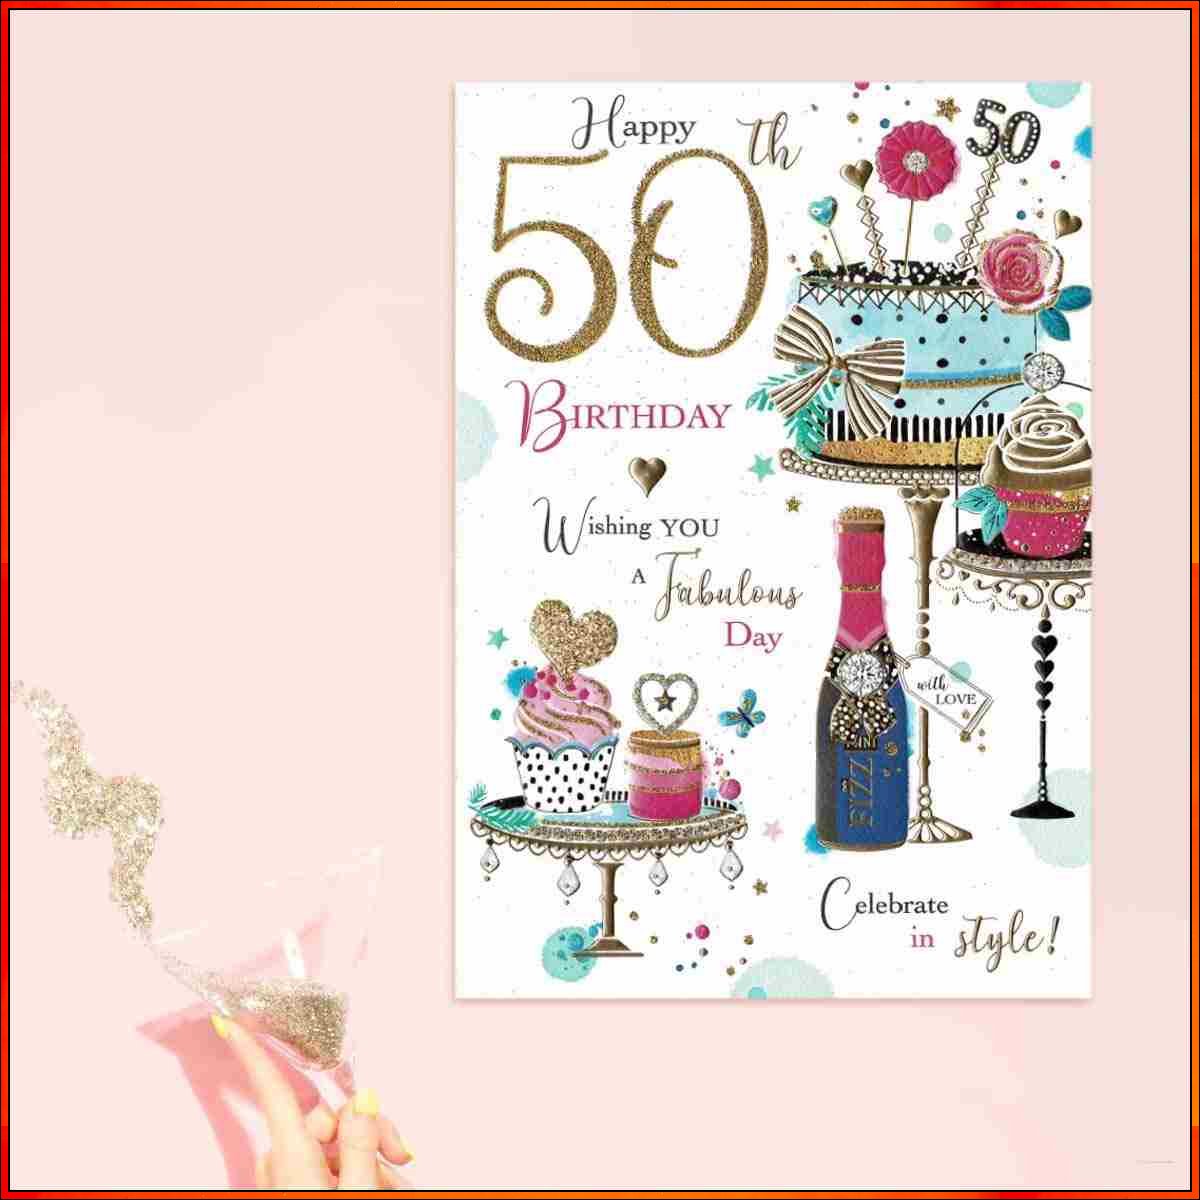 50th birthday images
